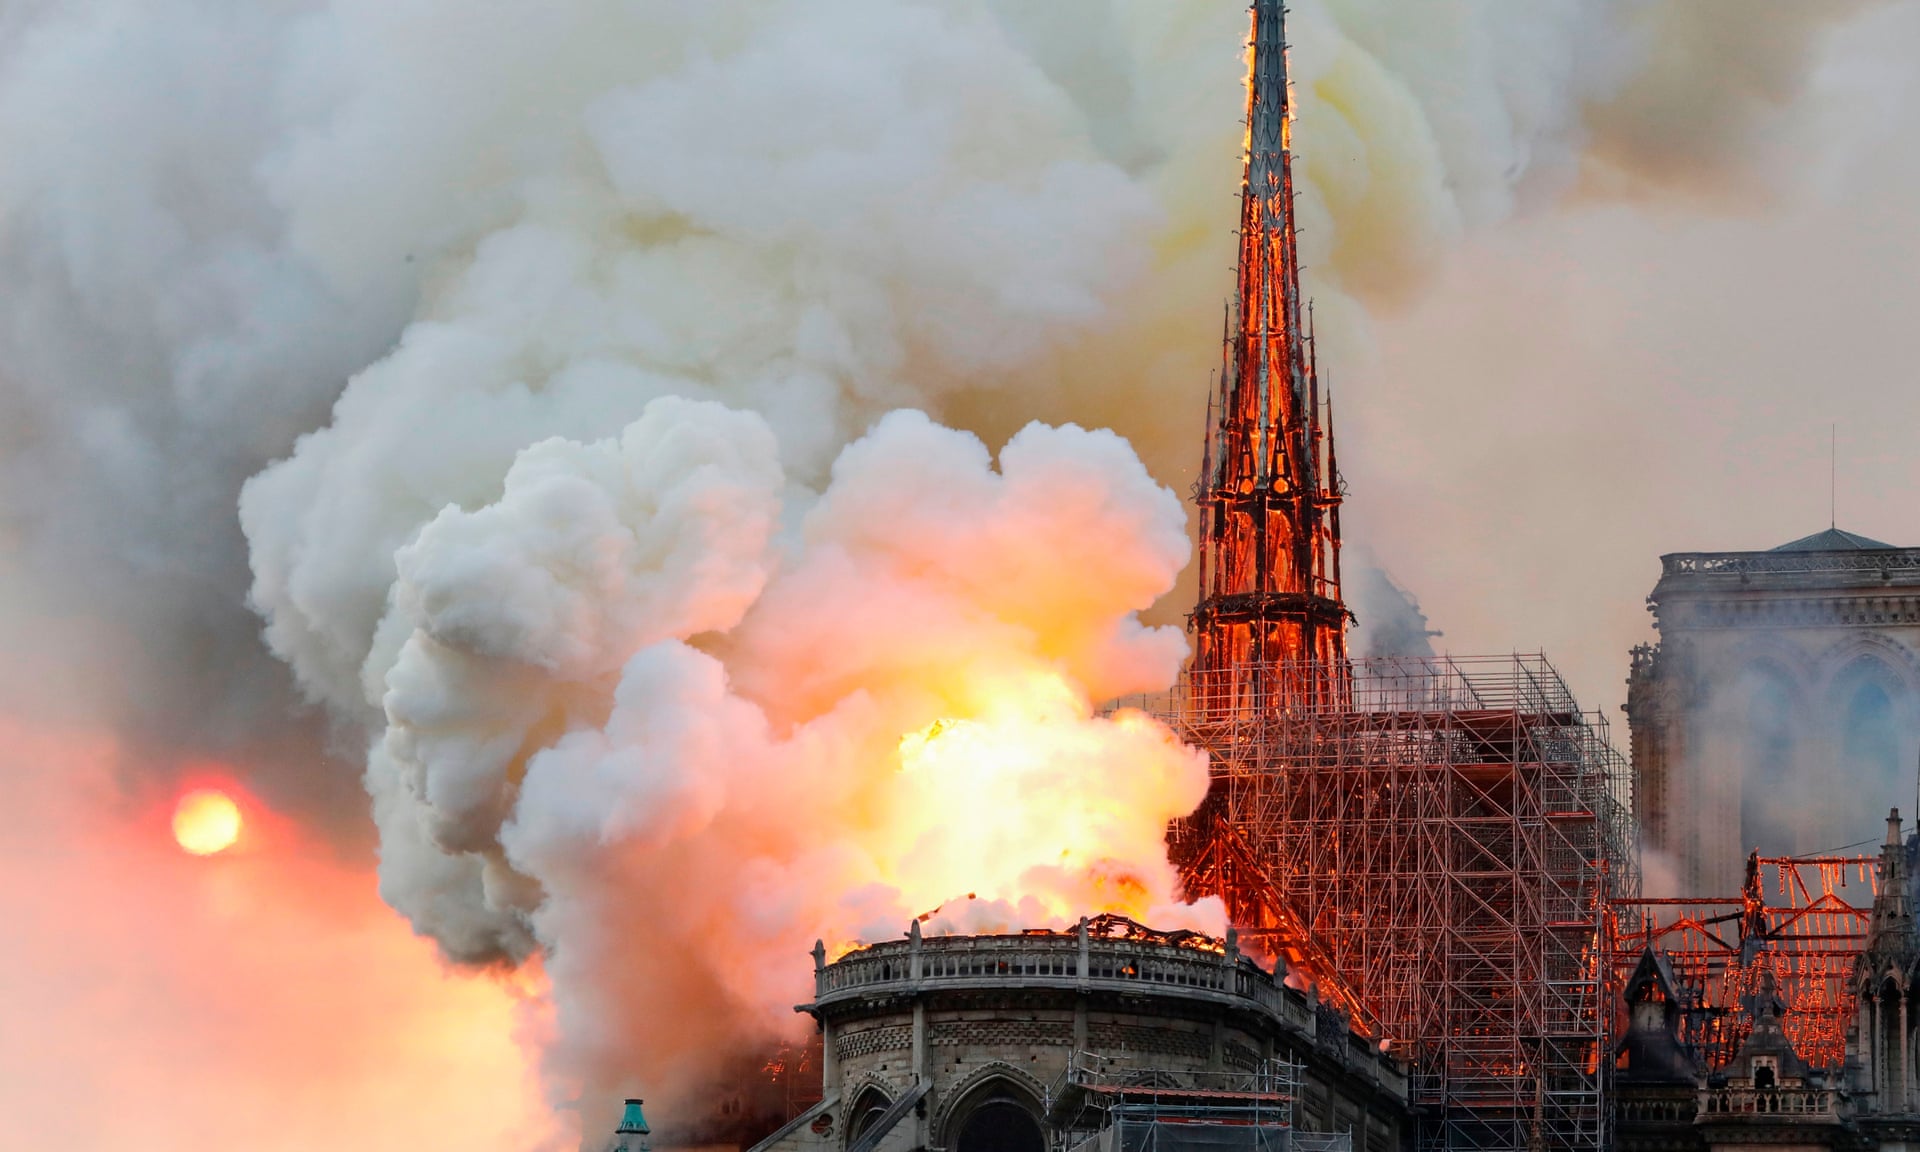 Notre Dame to be rebuilt within 5 years, Macron says